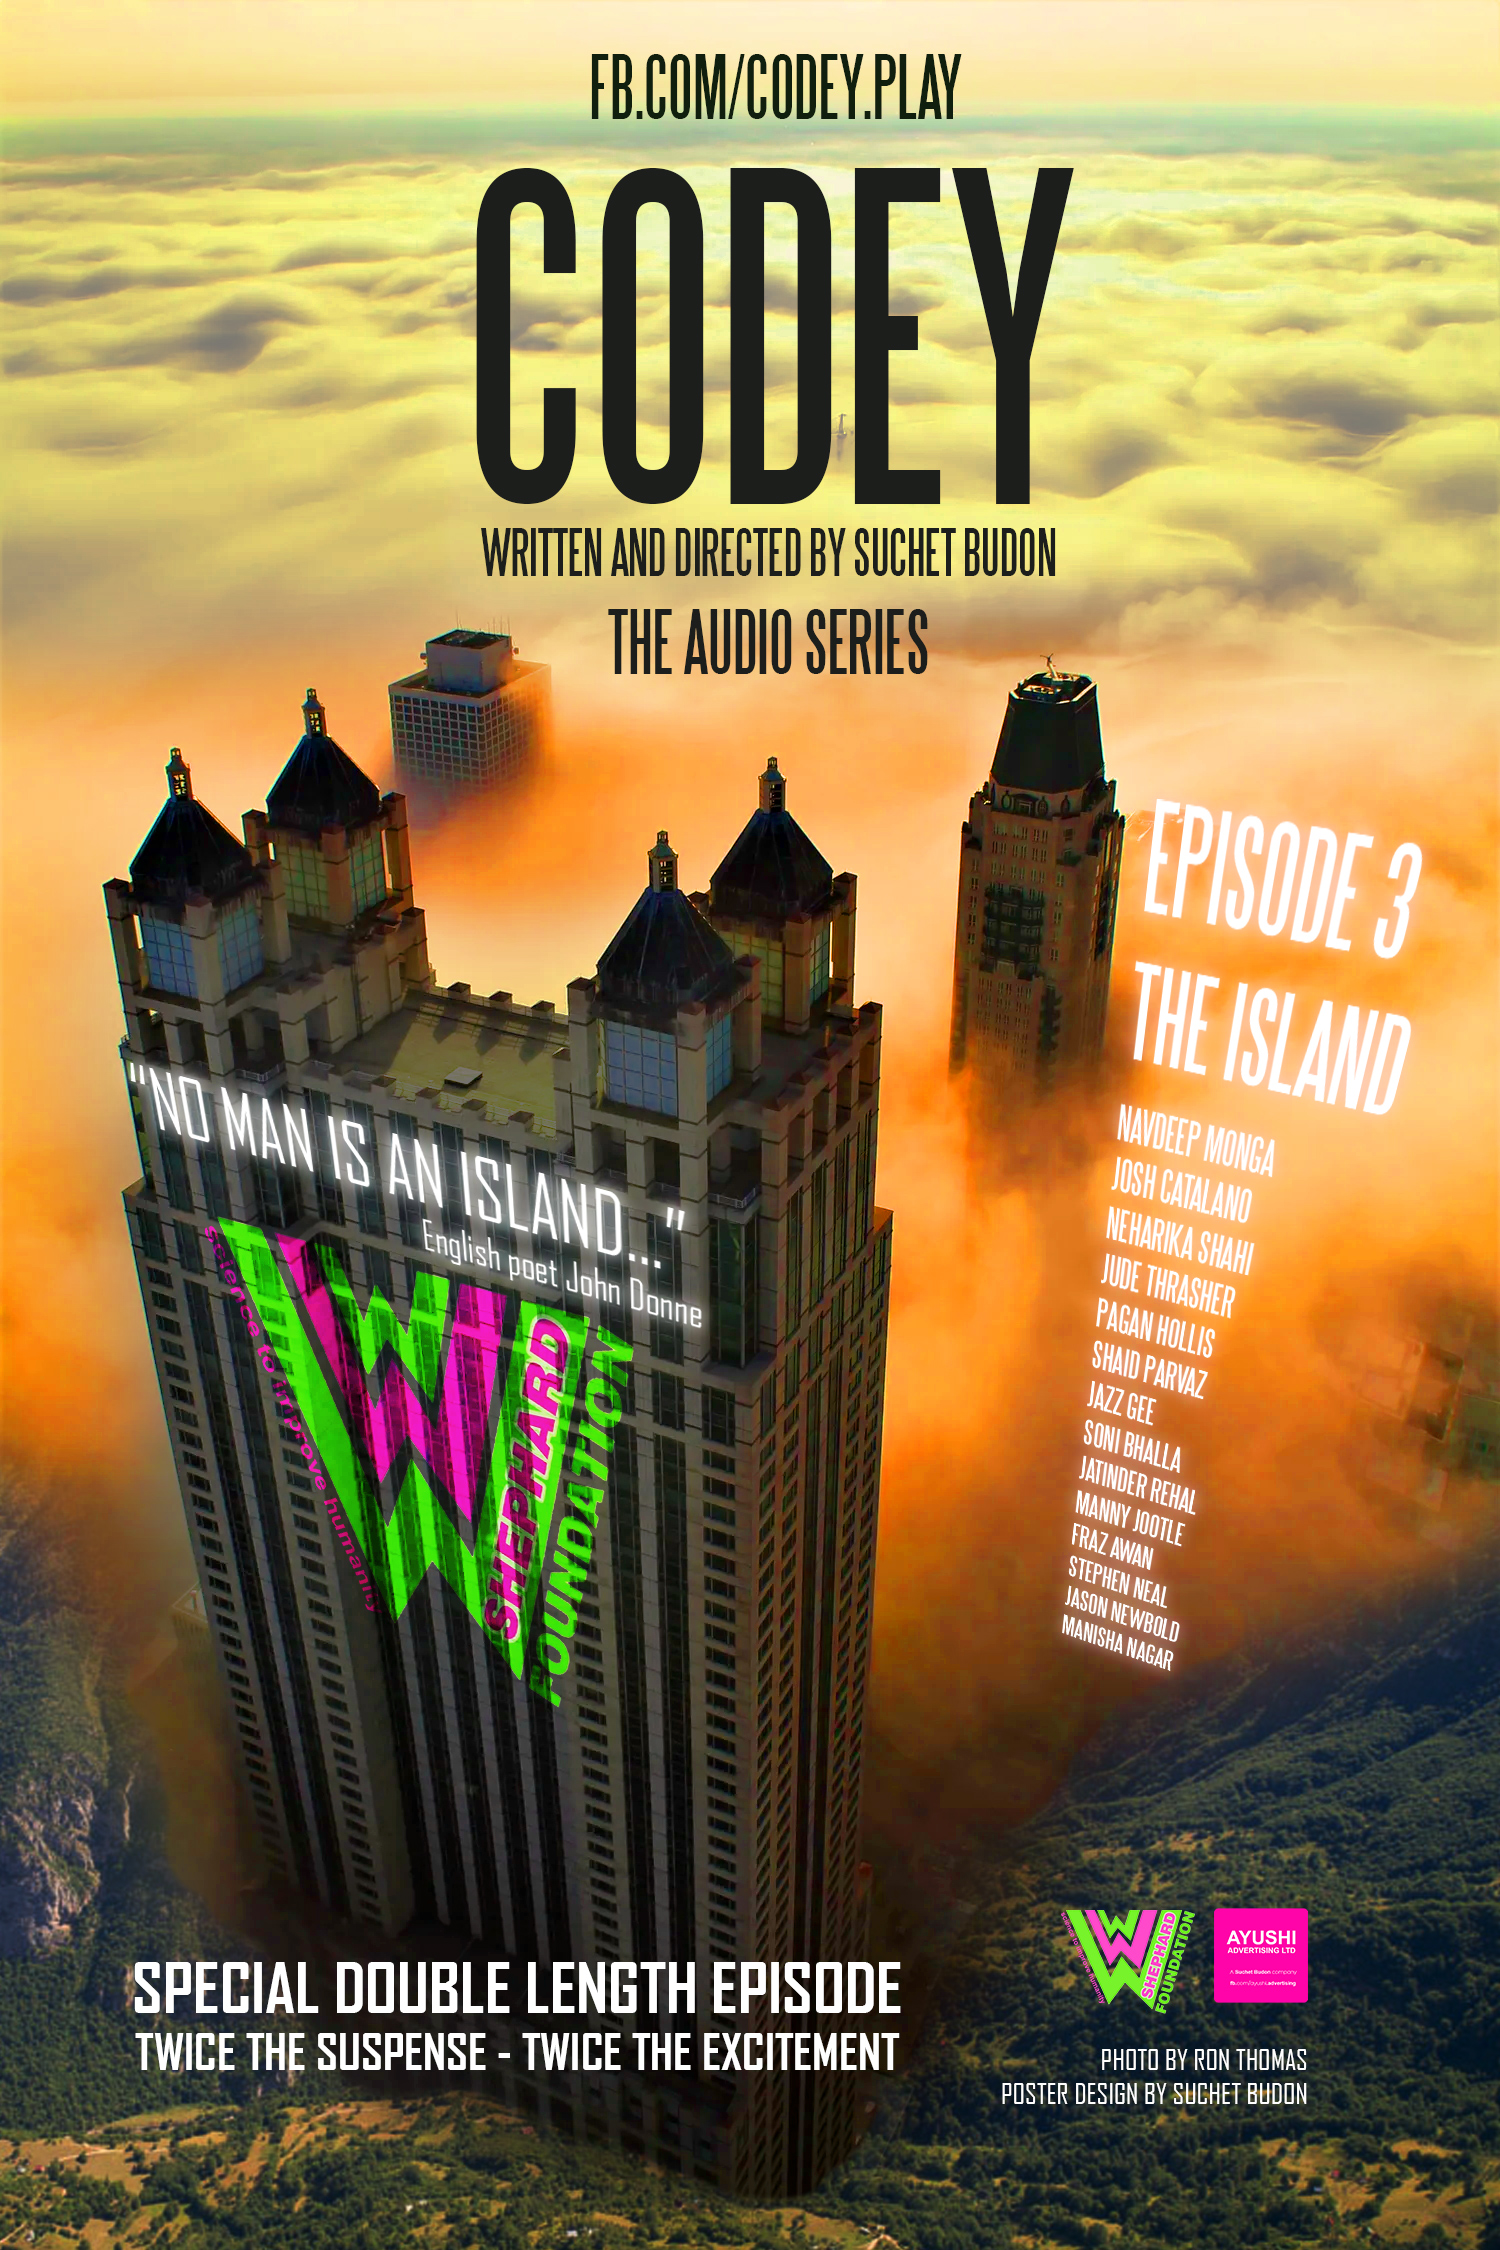 CODEY EPISODE 3: THE ISLAND - OFFICIAL POSTER